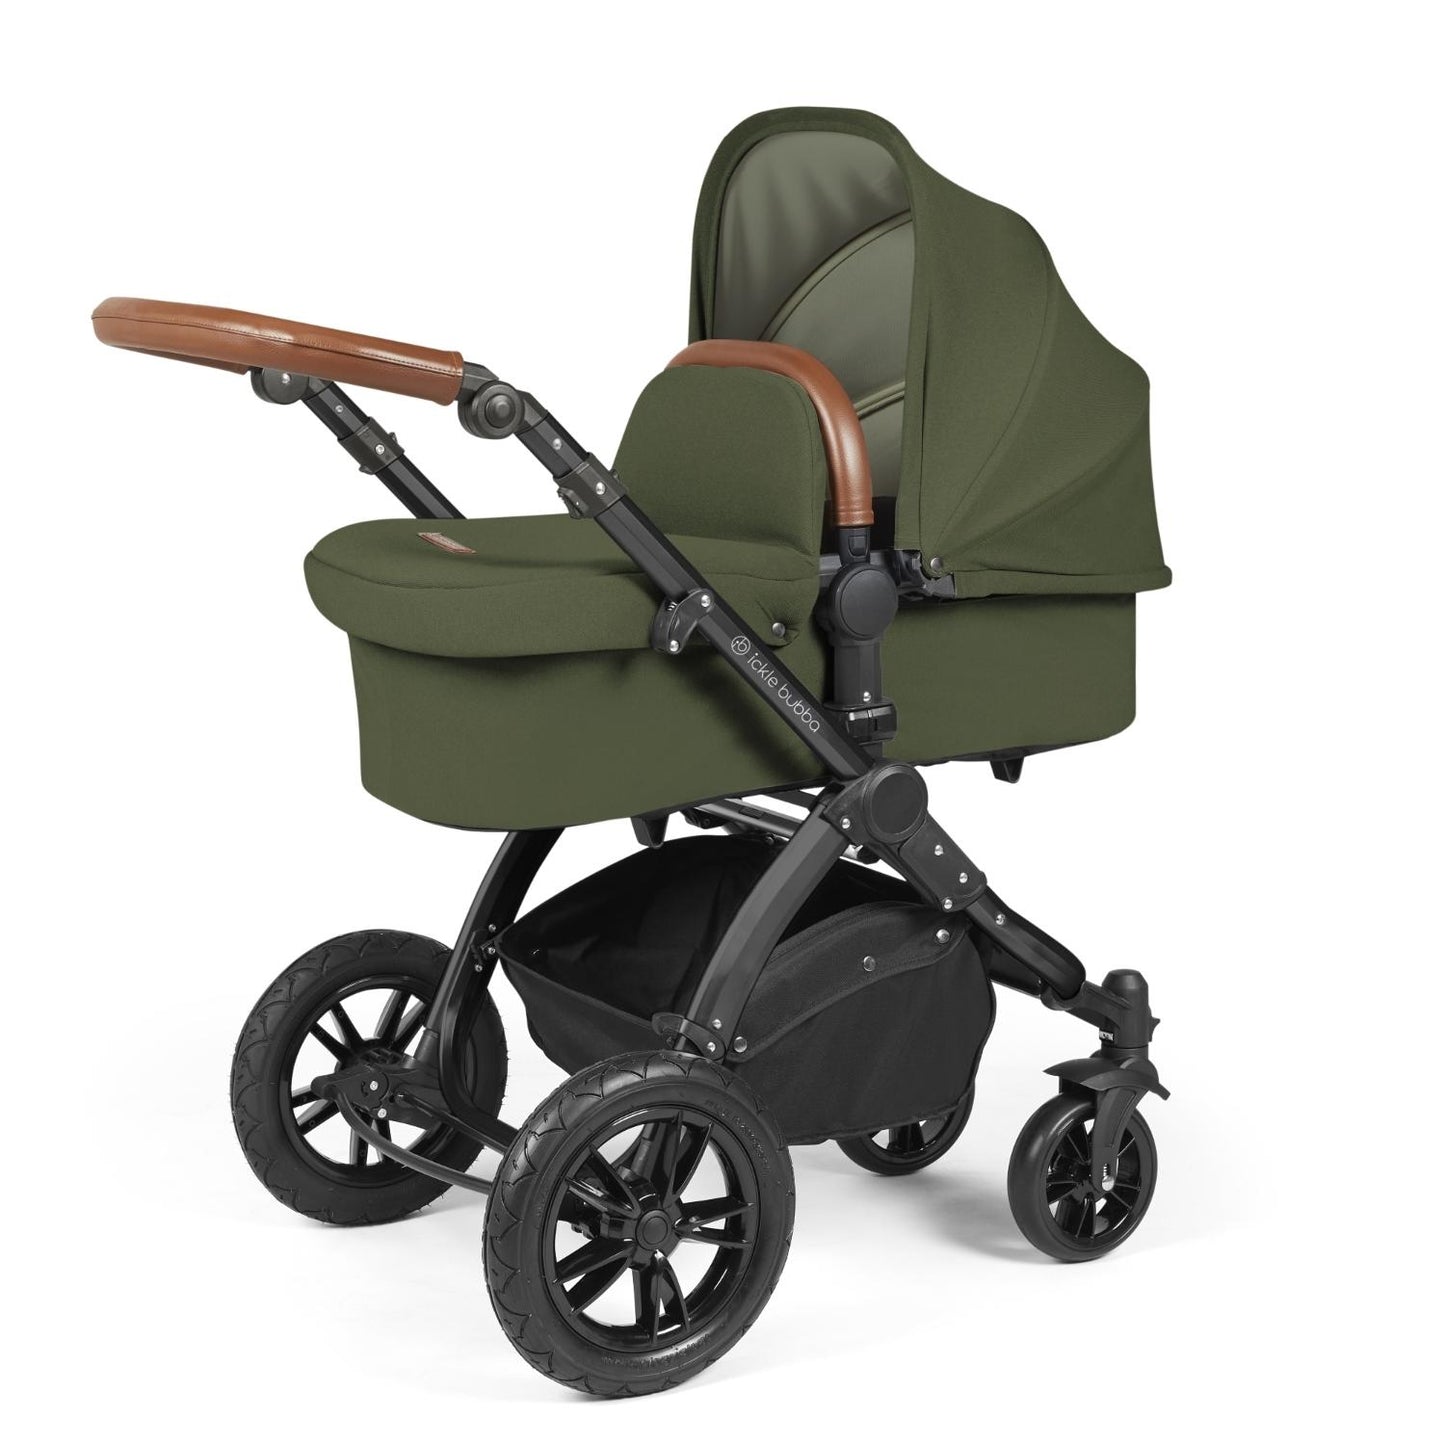 Ickle Bubba Stomp Luxe Pushchair with carrycot attached in Woodland green colour with tan handle